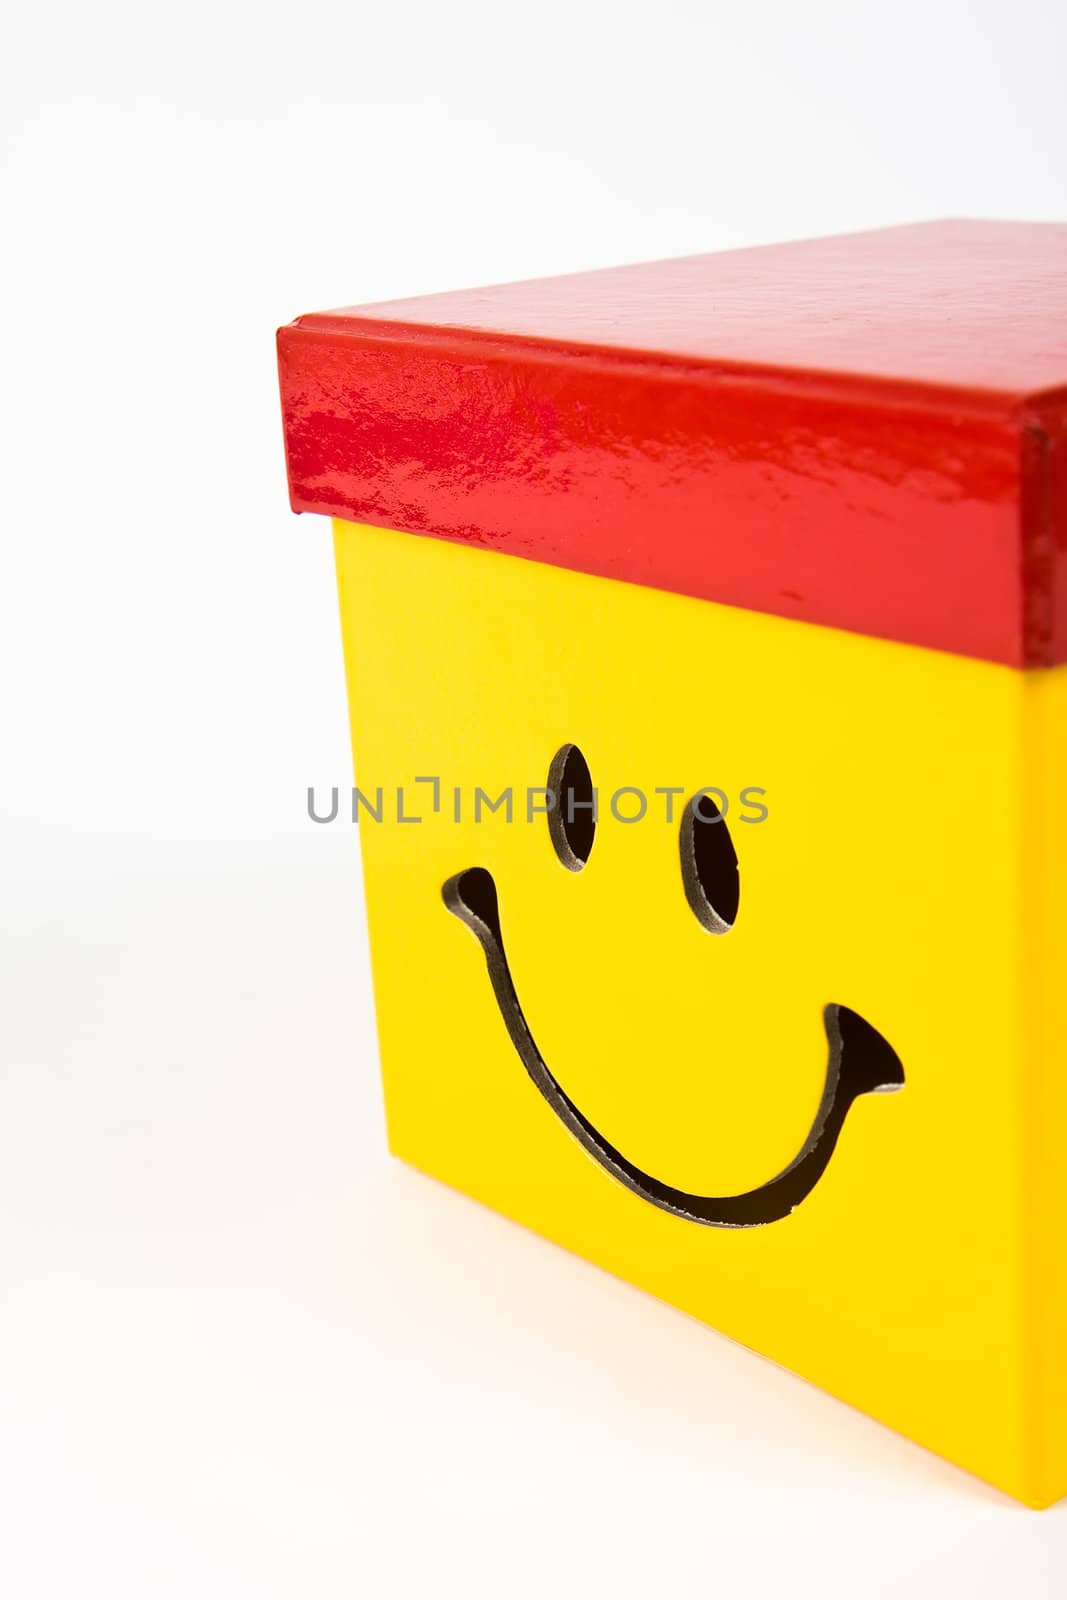 Smile on a yellow gift box with red cap.